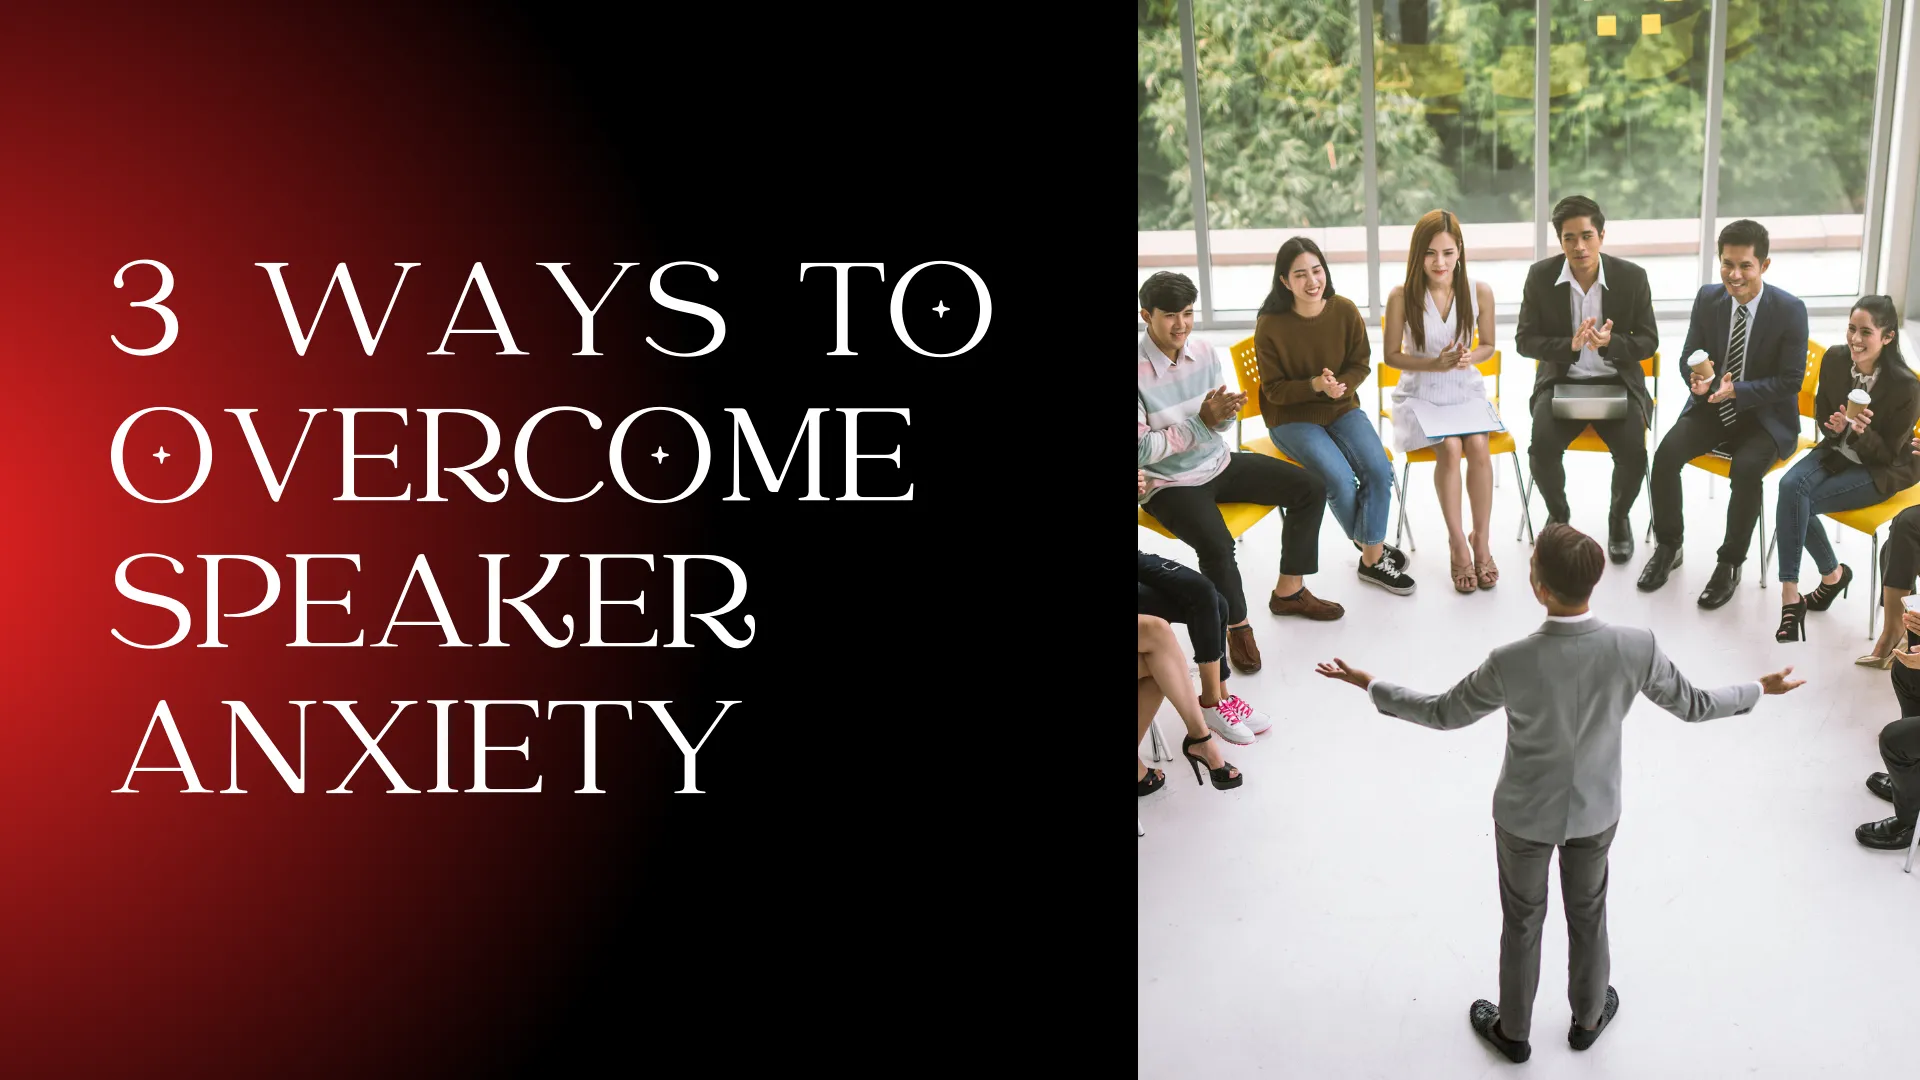 3 ways to overcome speaking anxiety